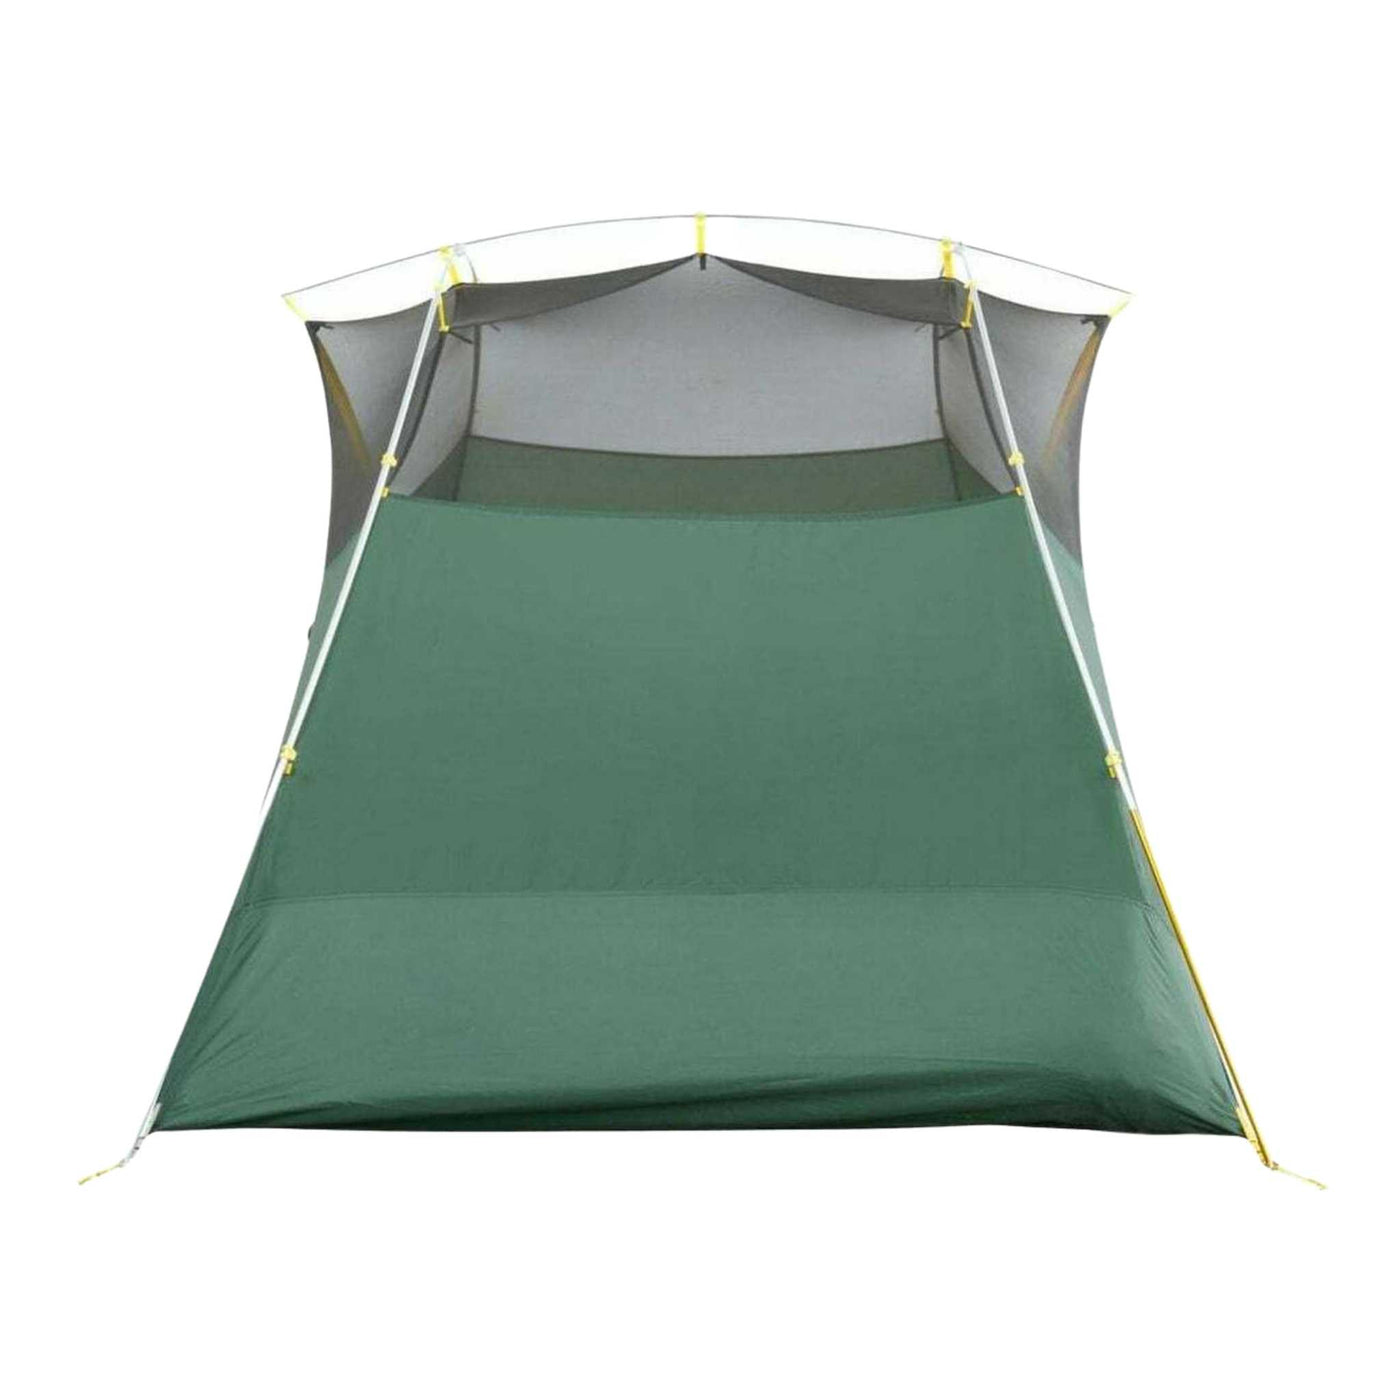 Sierra Designs Clearwing 3000 2 Person Tent | Tramping 2 Person Backpacking Tent | Further Faster Christchurch NZ #green-sd